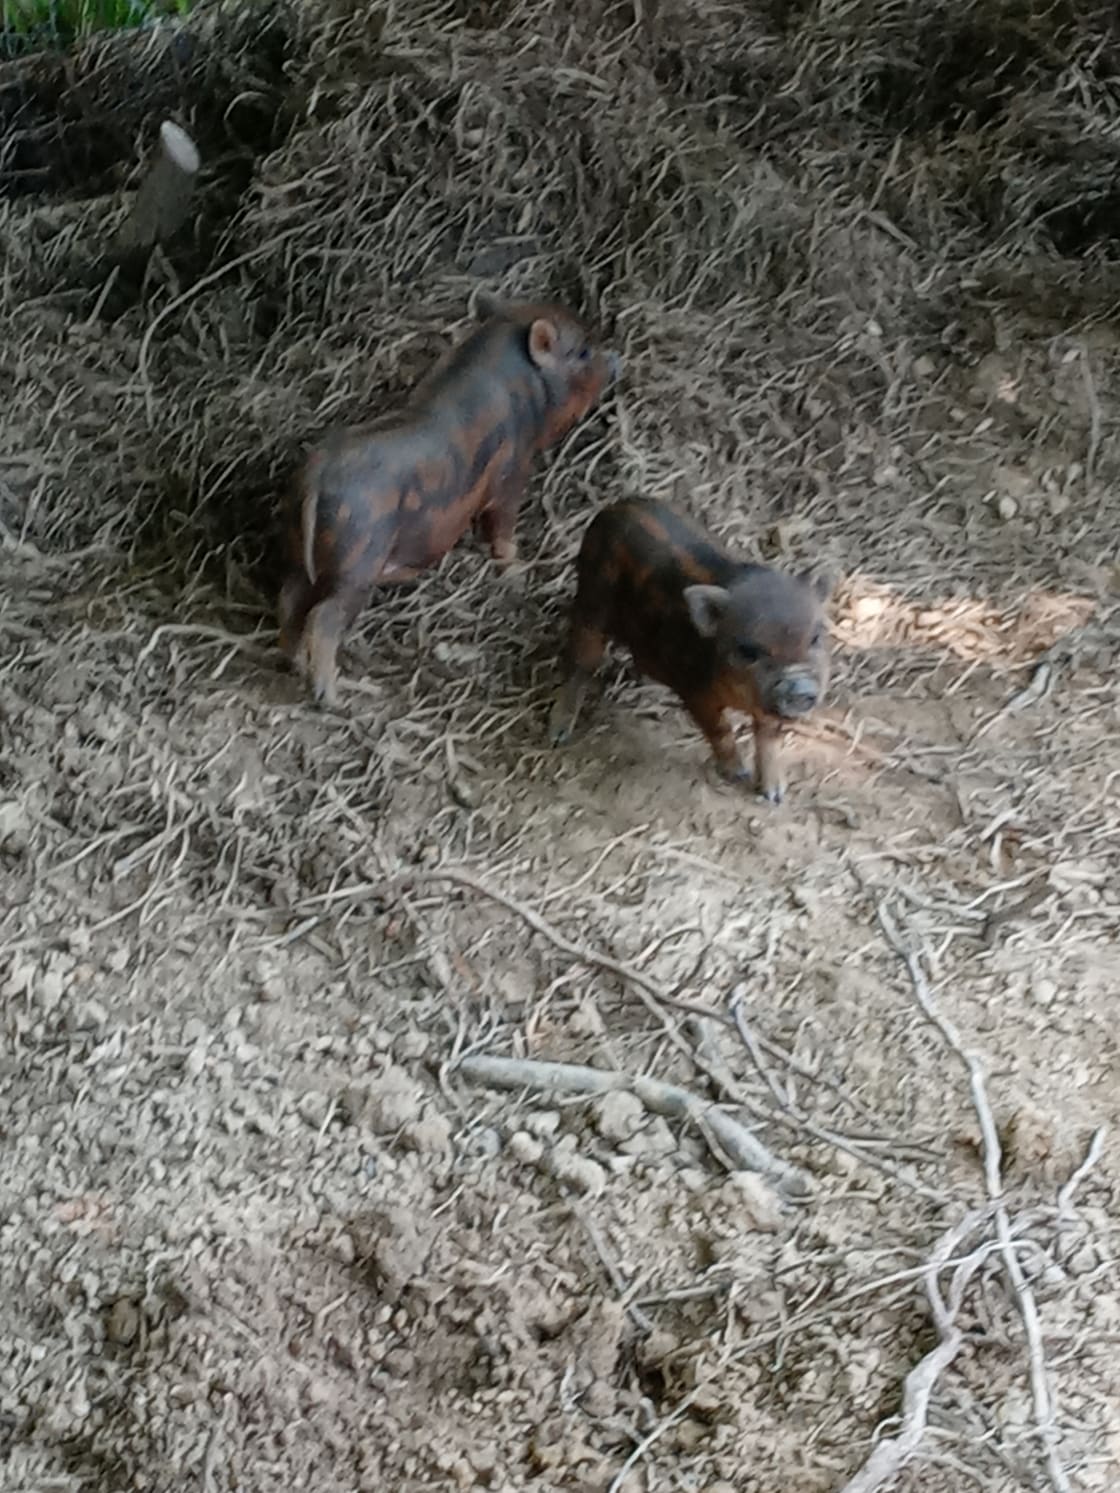 Come see Pot belly pigs-presently with two pigletts